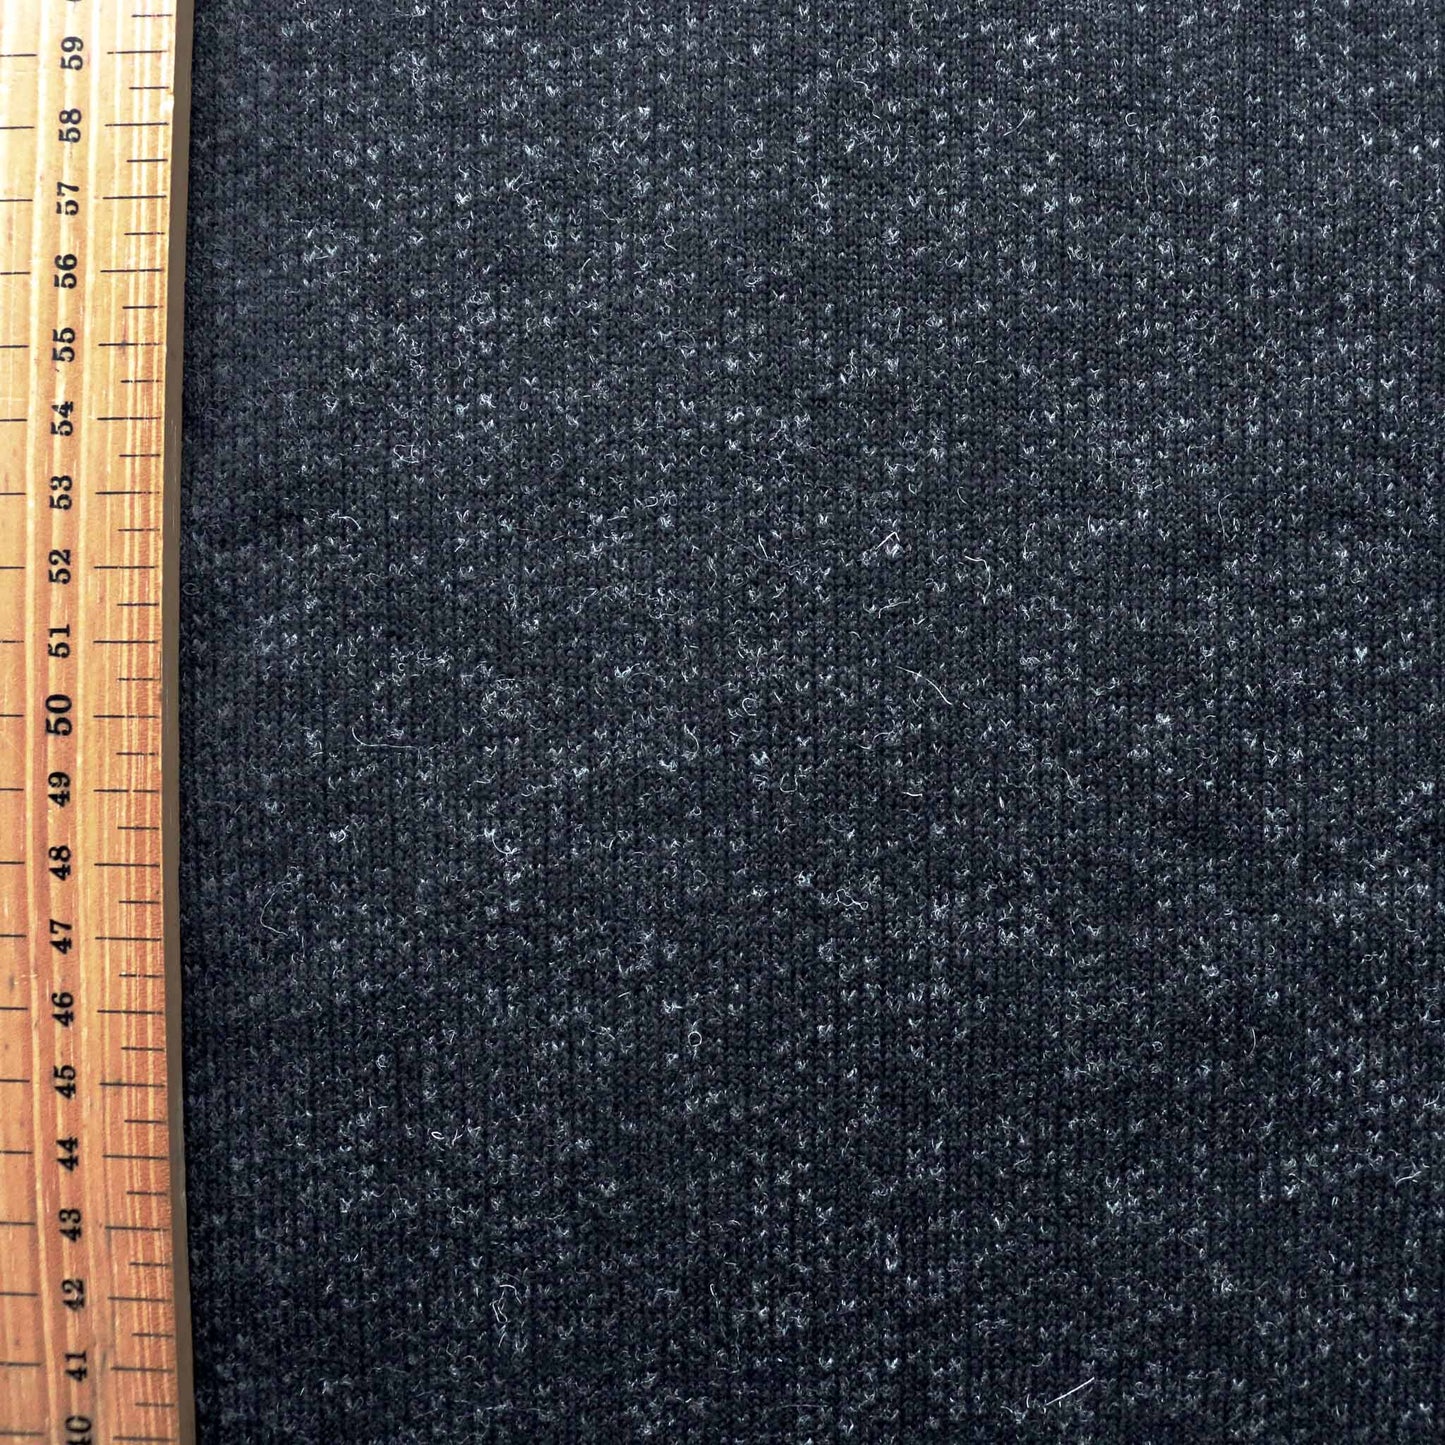 metre wool jersey dressmaking fabric in black and grey with felt back